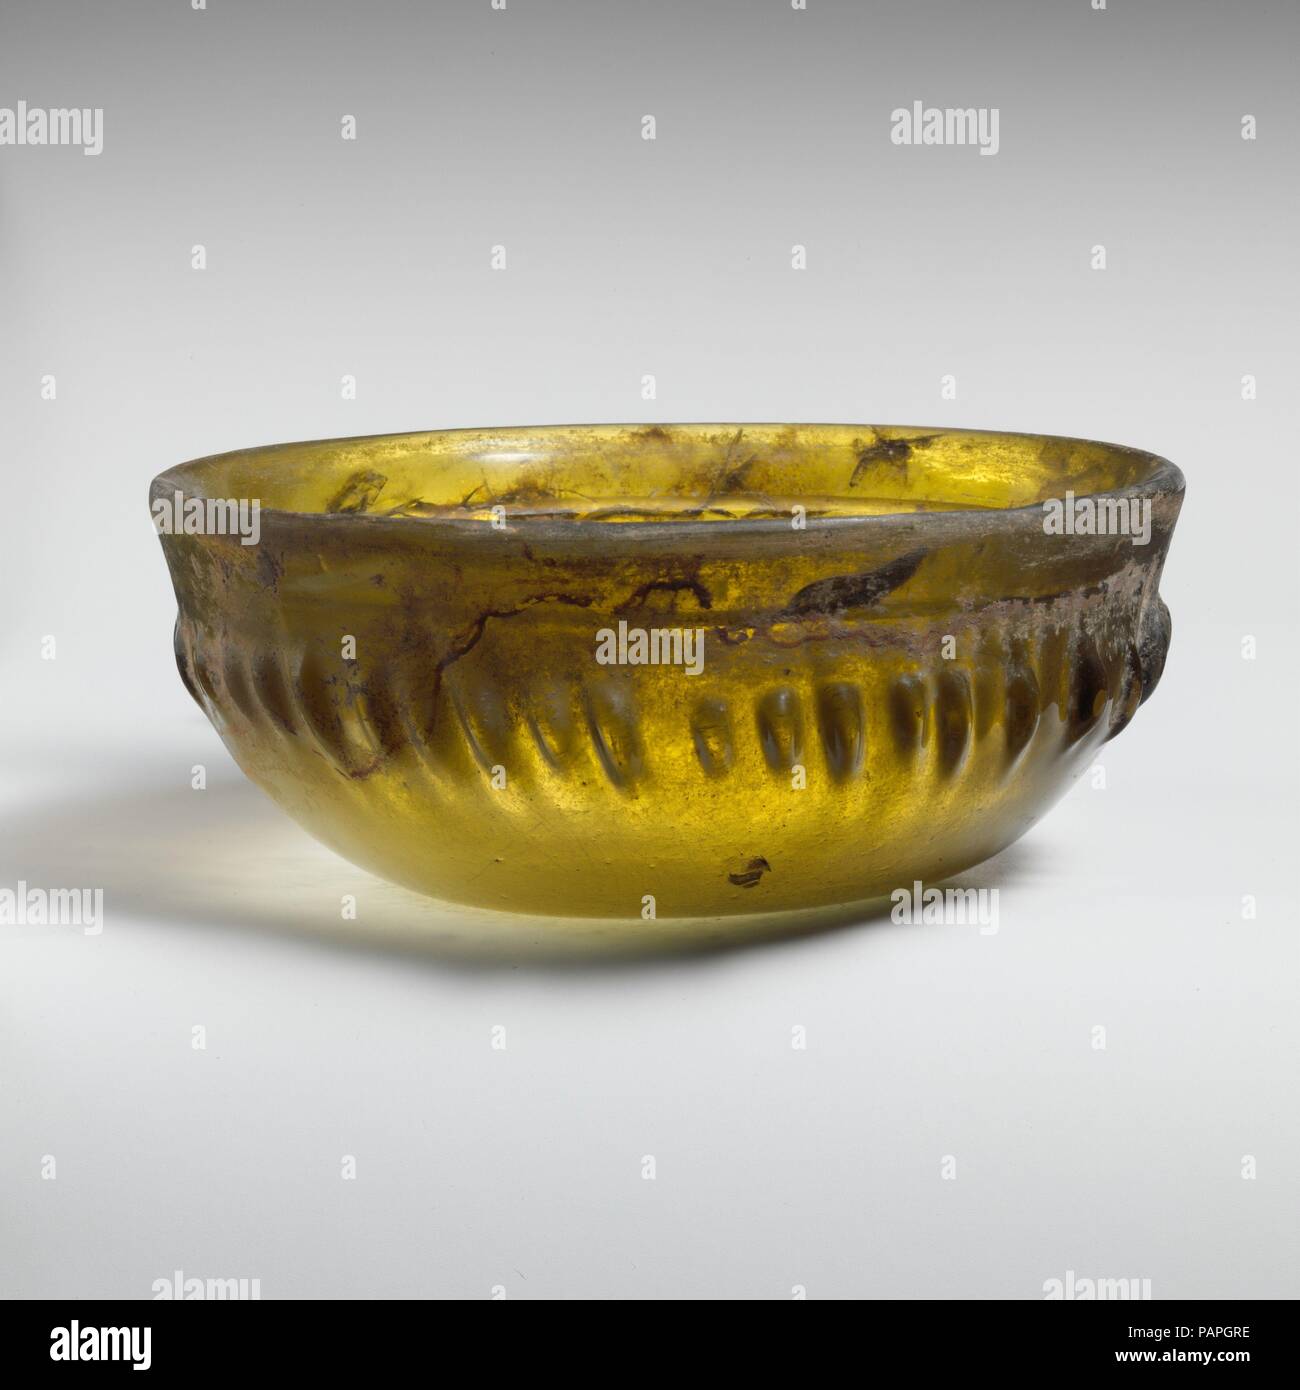 Glass ribbed bowl. Culture: Greek, Eastern Mediterranean. Dimensions: H.: 2 3/16 in. (5.6 cm)  Diam.: 5 3/8 in. (13.7 cm). Date: 1st century B.C..  Translucent yellow green.  Outsplayed rim, with upright rounded edge and plain inward-sloping band below; convex side curving in downwards; concave bottom.  On interior, a single broad horizontal groove at junction of rim and side; on exterior, forty-three short, unevely-spaced ribs of varying length and width, arranged around bulging middle section of body, occasionally flanked by vertical tooling marks.  Intact; some internal strain cracks; some  Stock Photo